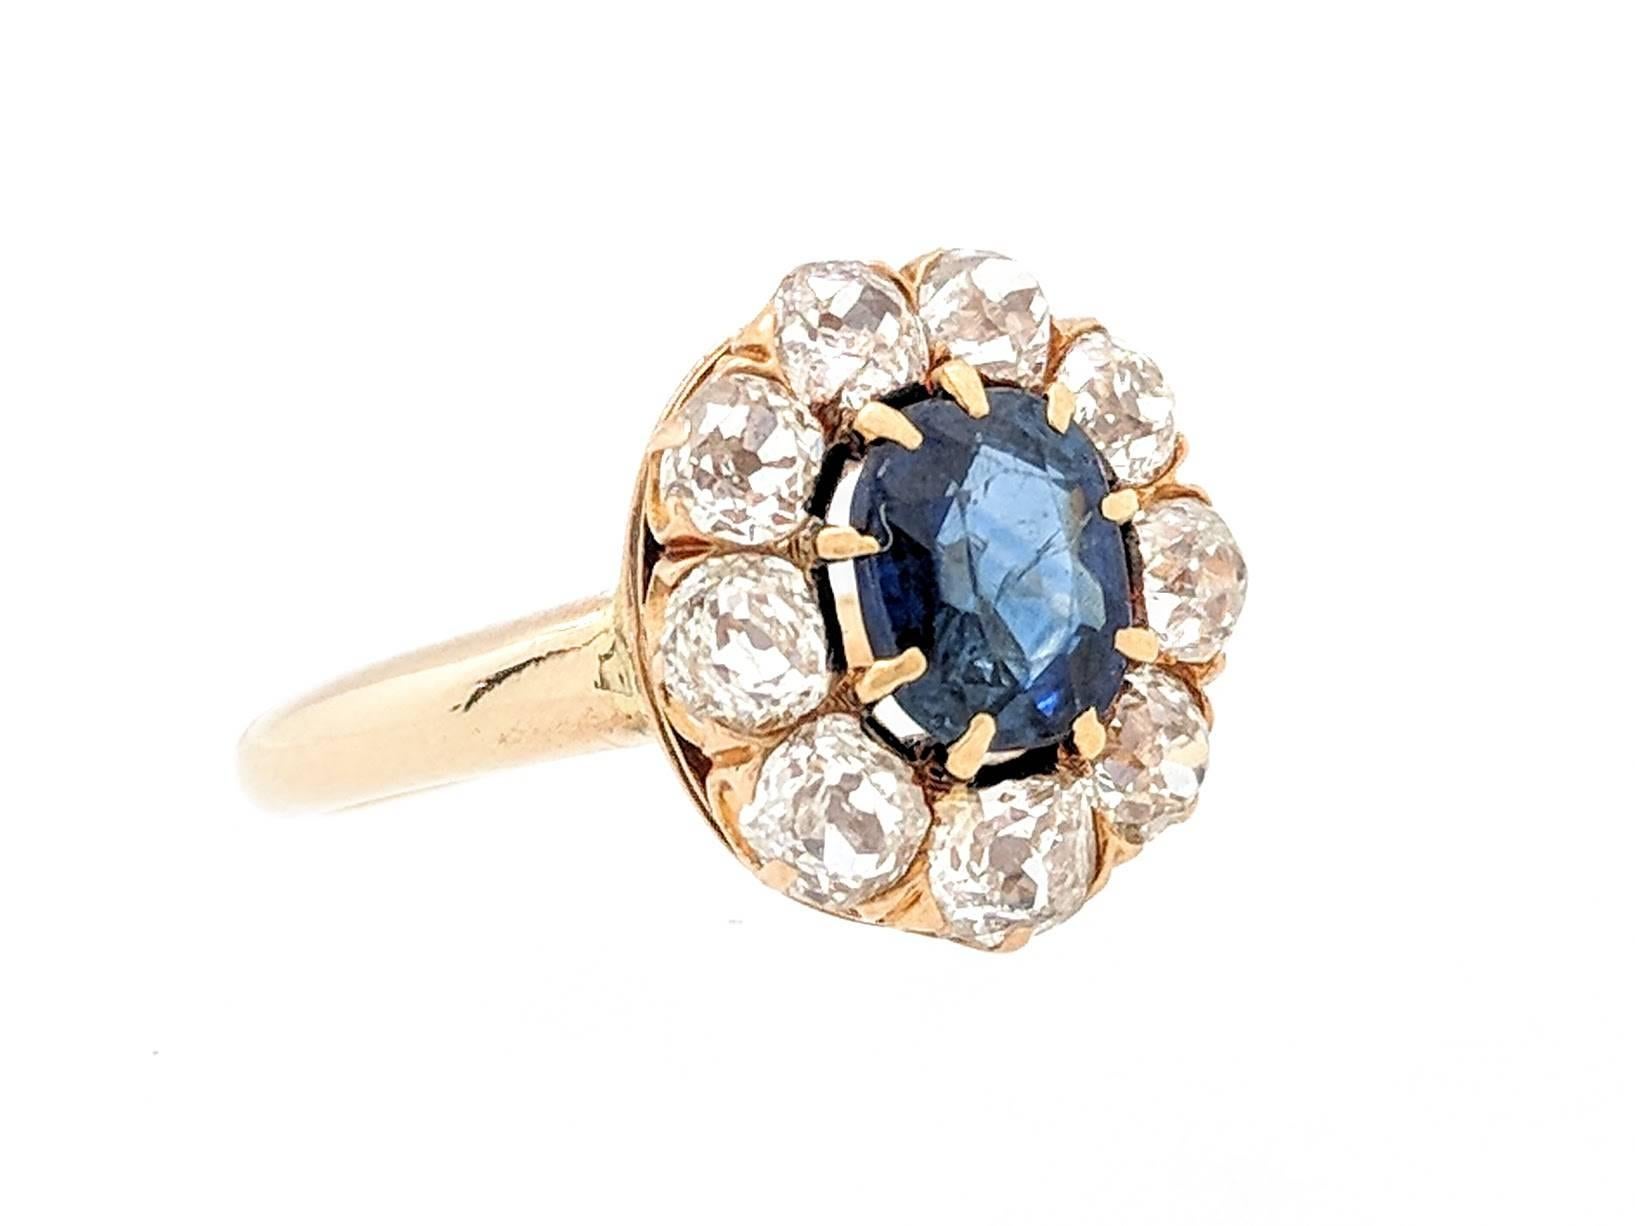 Early Victorian 14 Karat Yellow Gold 2.35 Carat Sapphire and Diamond Estate Ring For Sale